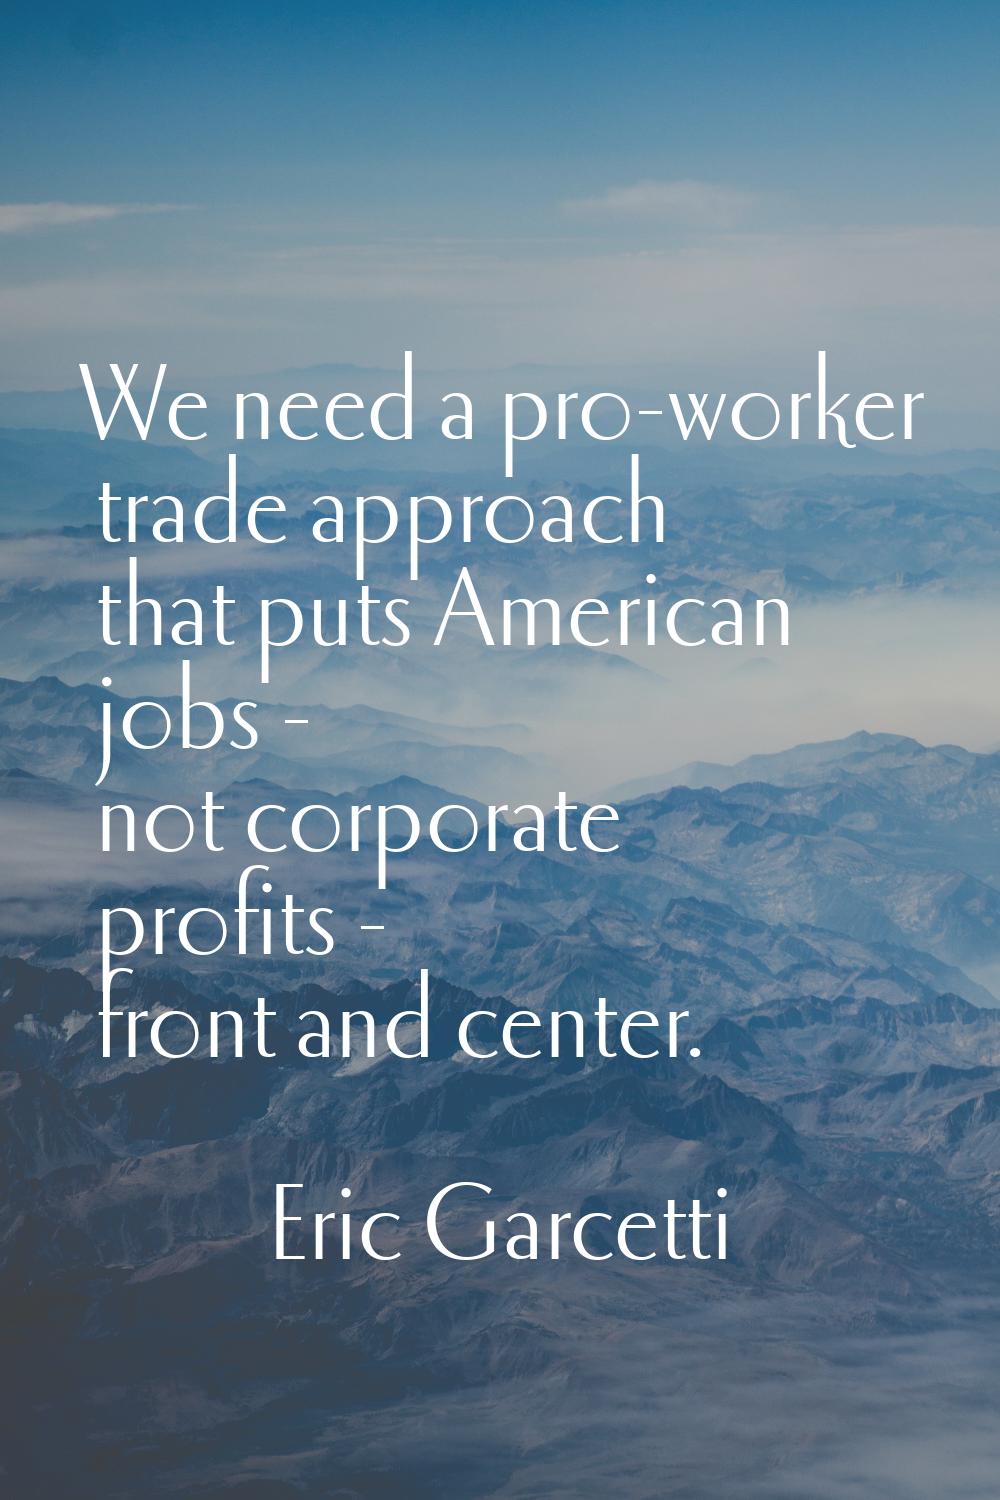 We need a pro-worker trade approach that puts American jobs - not corporate profits - front and cen